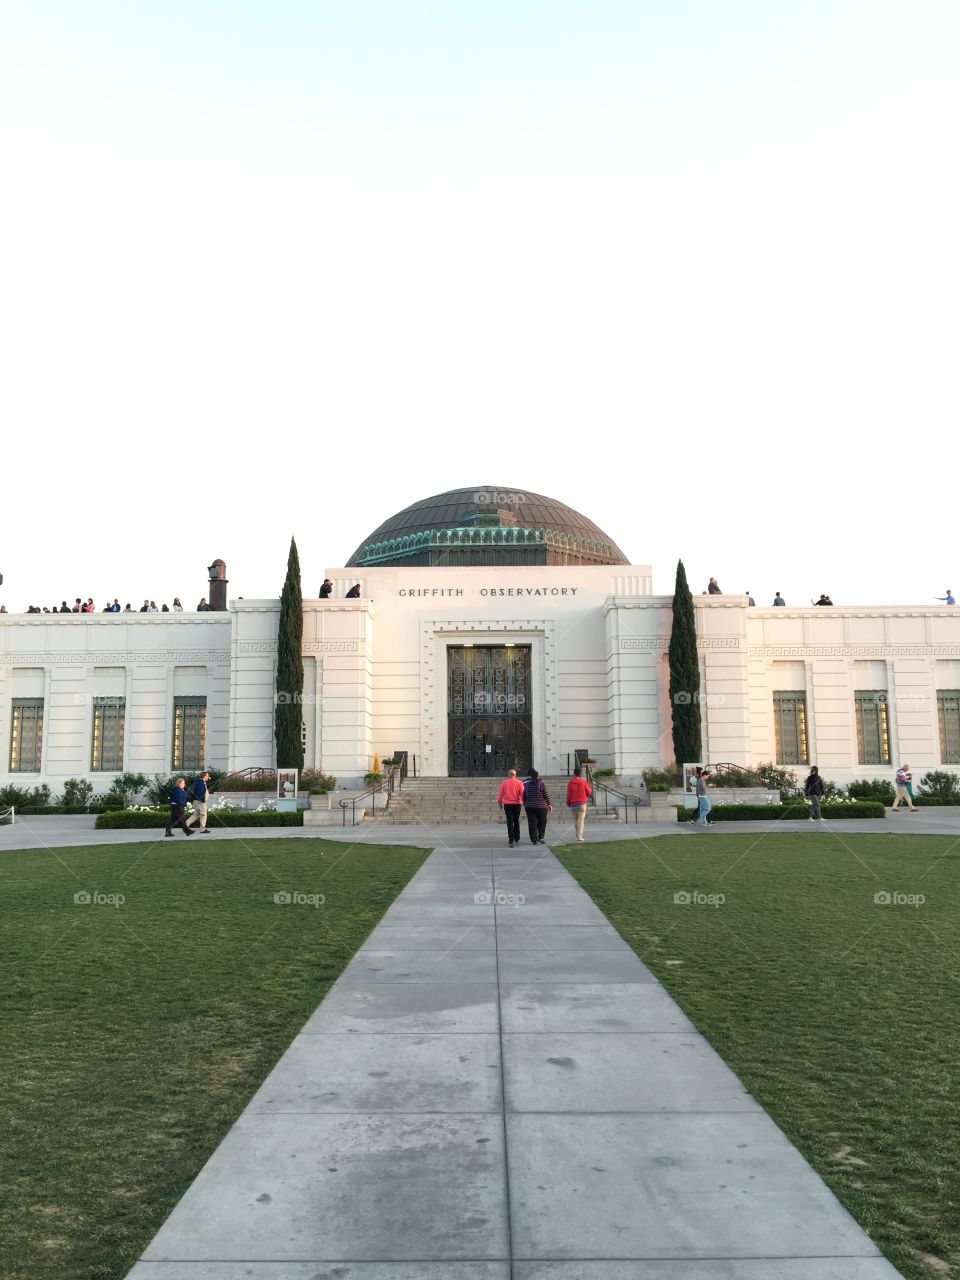 Griffith Observatory at Los Angeles